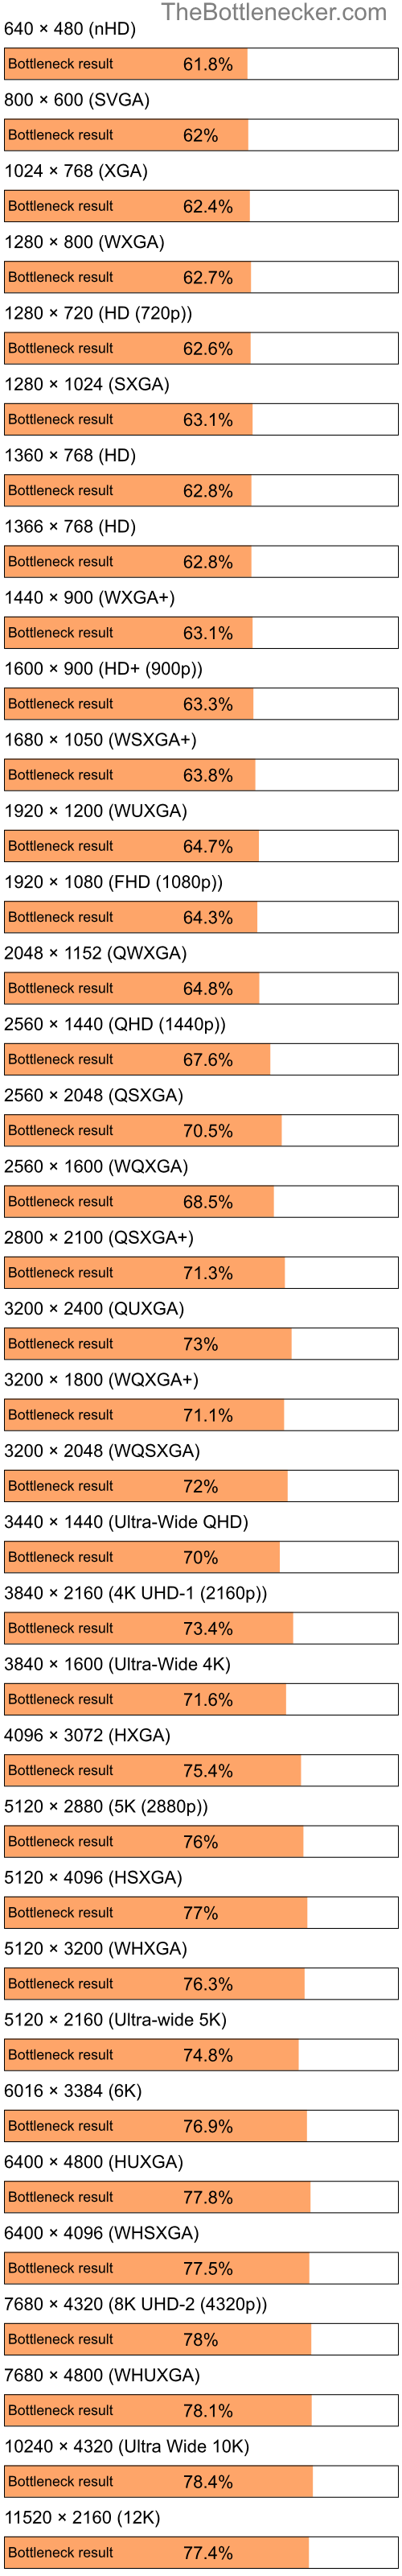 Bottleneck results by resolution for Intel Atom N280 and NVIDIA Quadro NVS 140M in Processor Intense Tasks